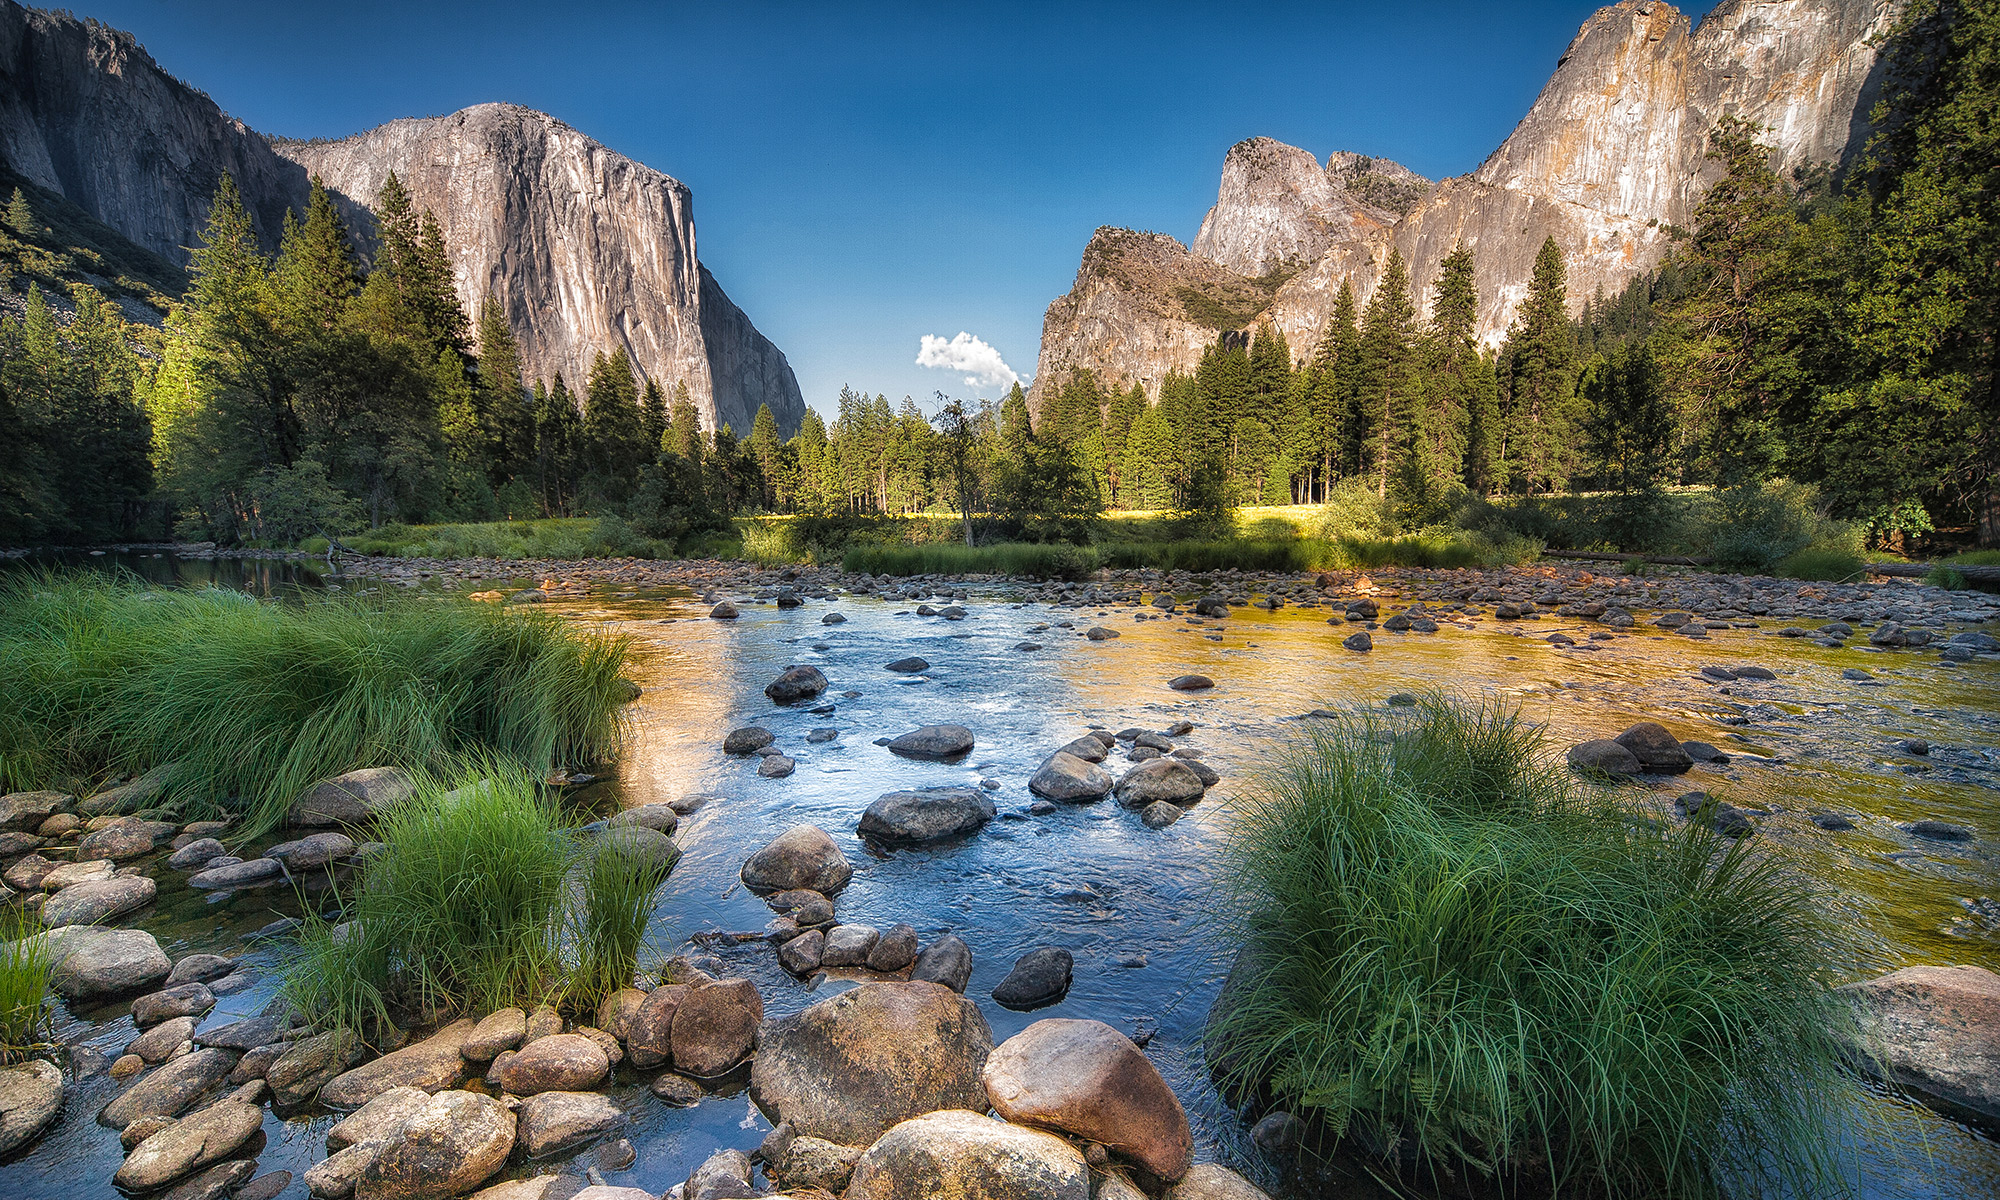 Yosemite National park with rocks, shallow lake and large rock mountain in the background in clear sky.